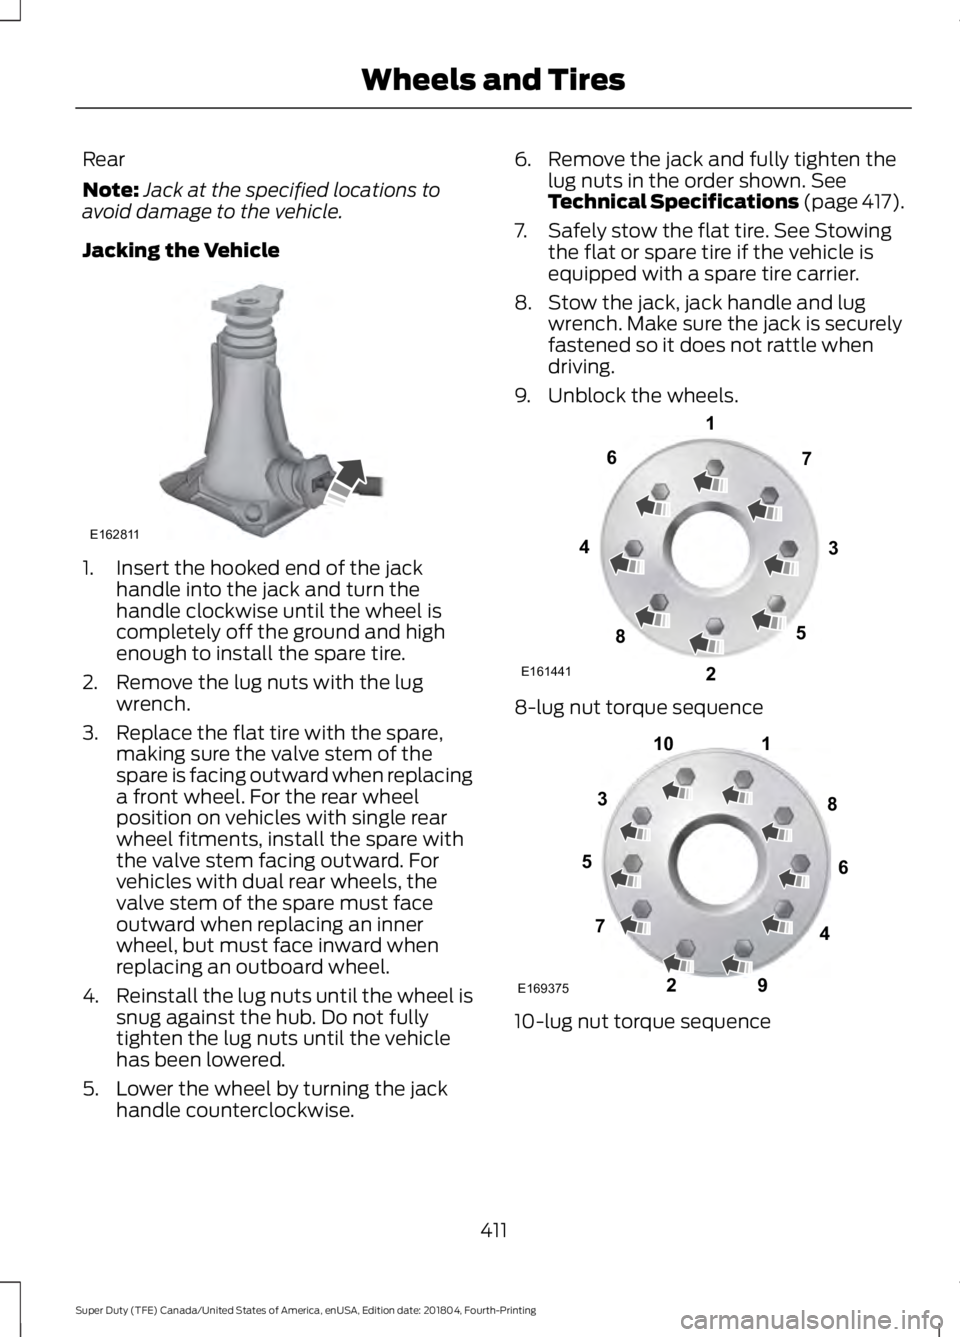 FORD F450 SUPER DUTY 2019  Owners Manual Rear
Note:
Jack at the specified locations to
avoid damage to the vehicle.
Jacking the Vehicle 1. Insert the hooked end of the jack
handle into the jack and turn the
handle clockwise until the wheel i